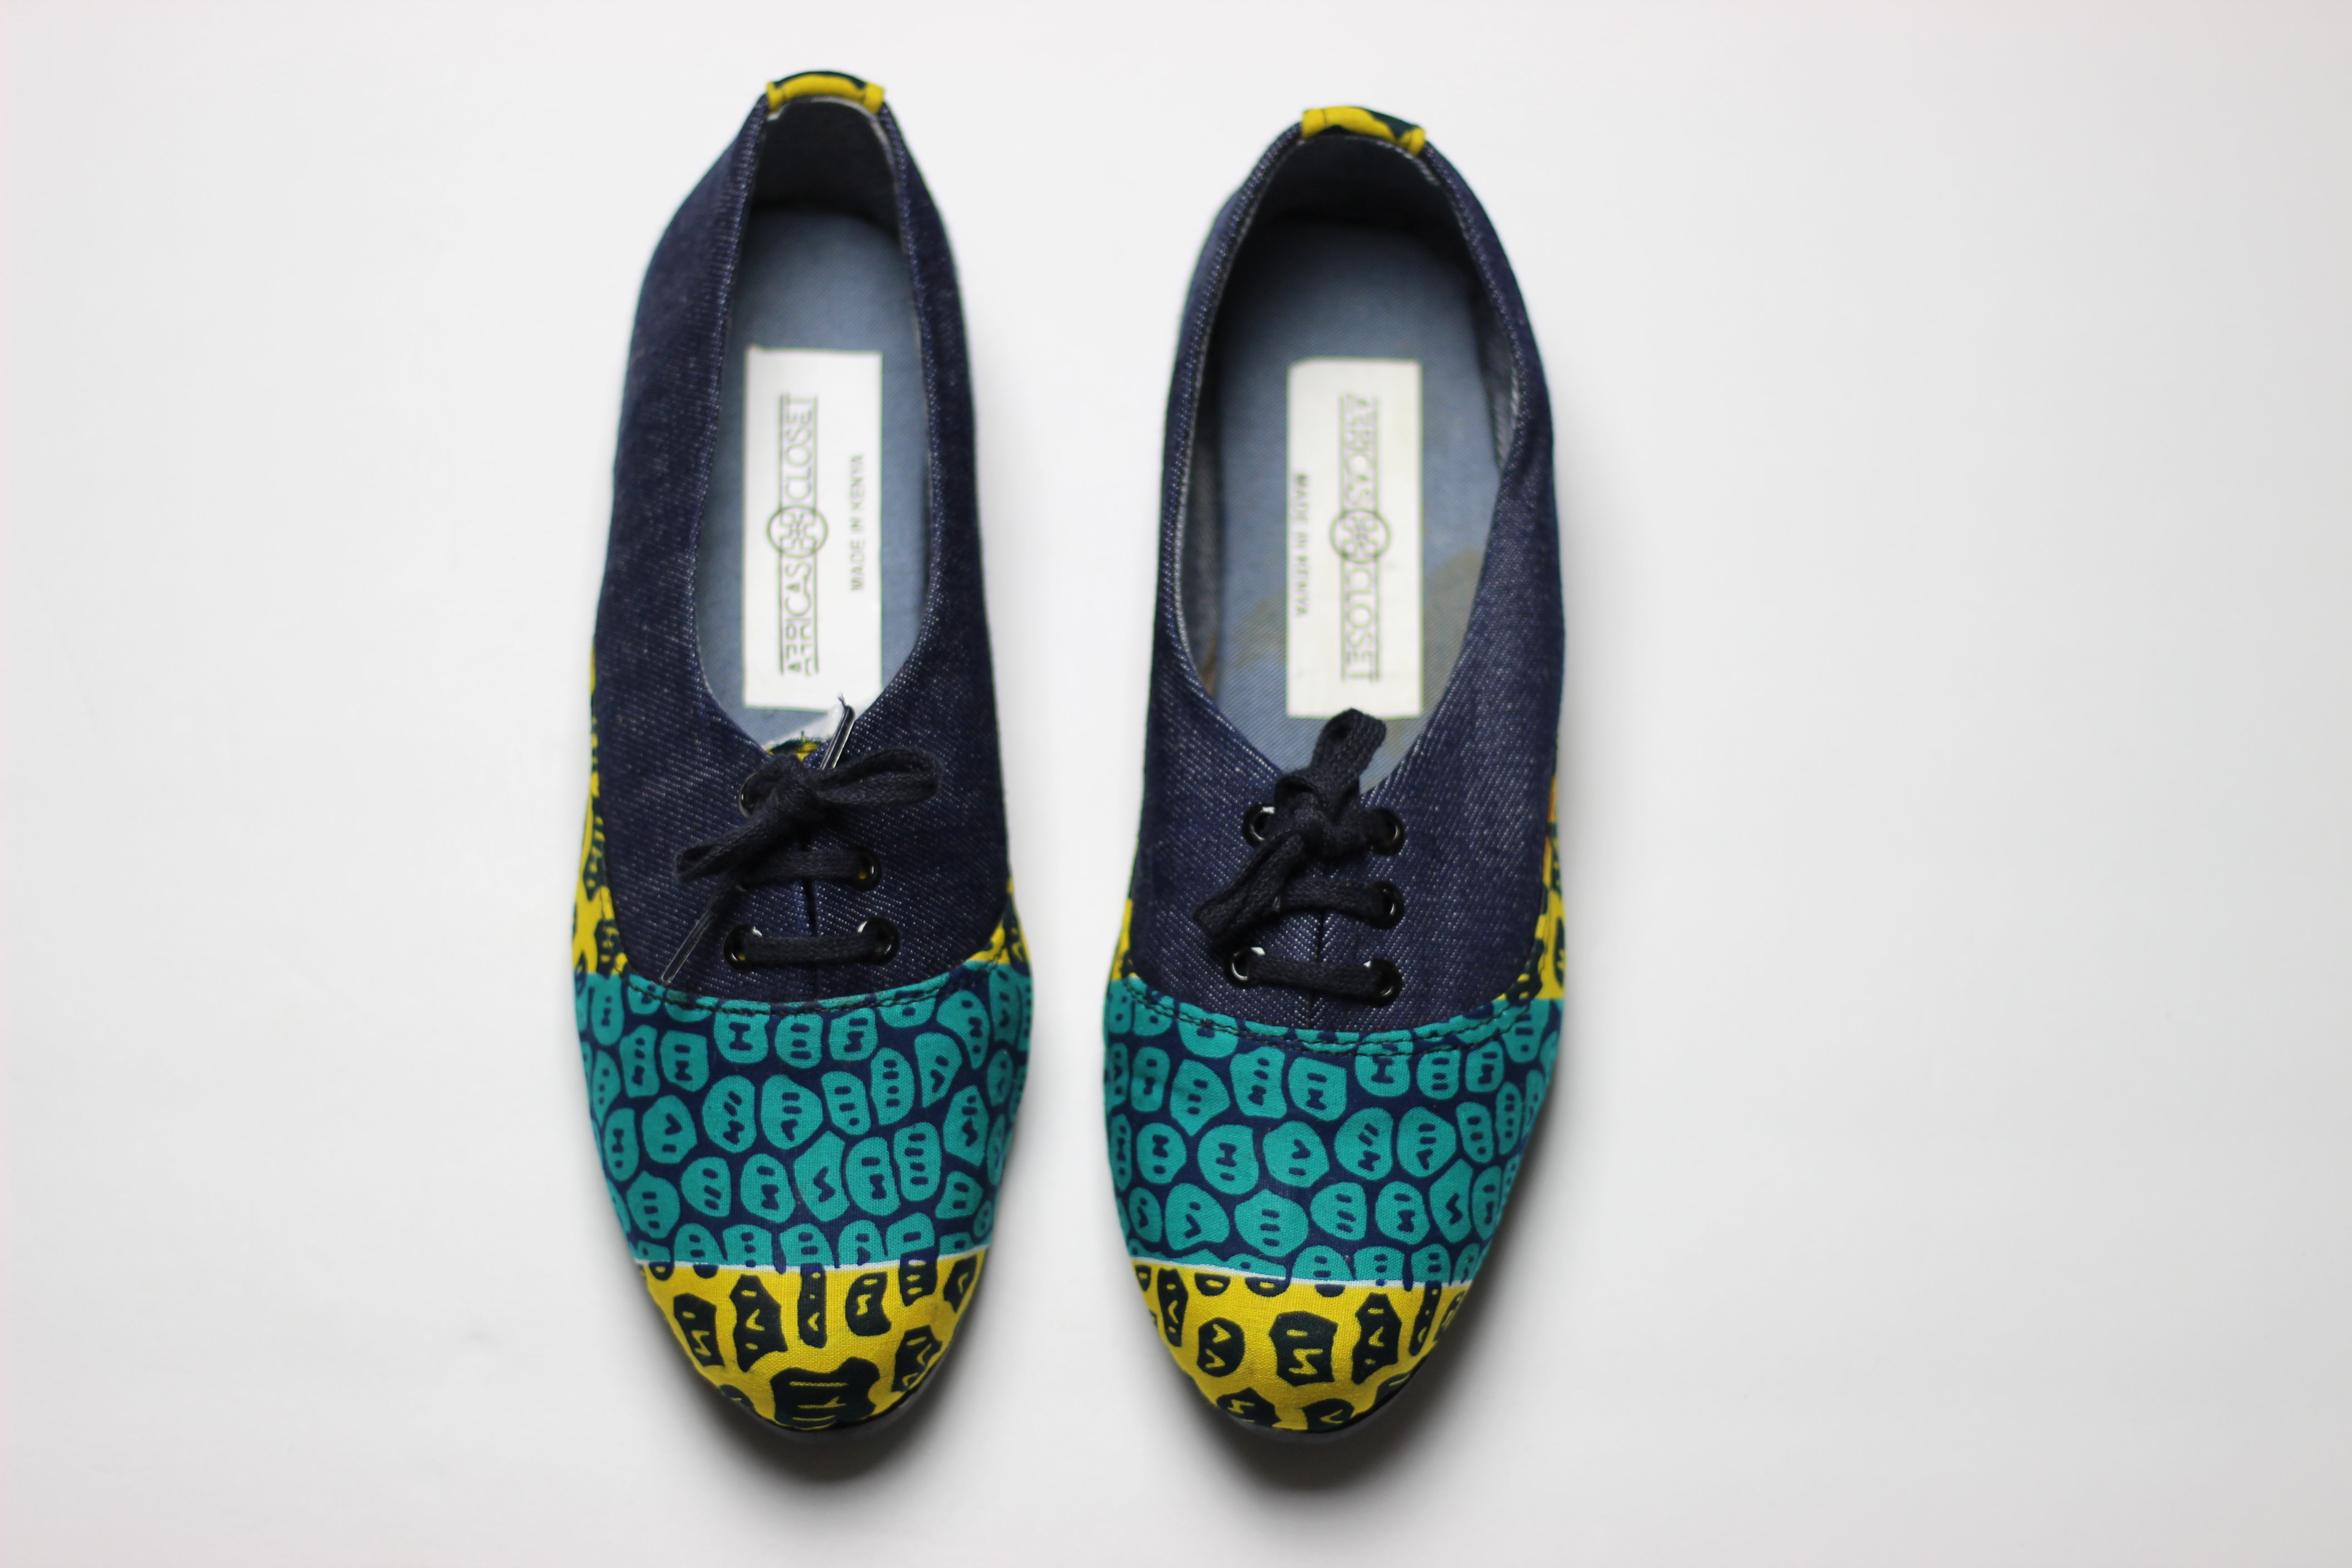 African Print /Ankara Flat Shoes (with laces) Denim detailed - Yellow and Green Animal Print. - Africas Closet